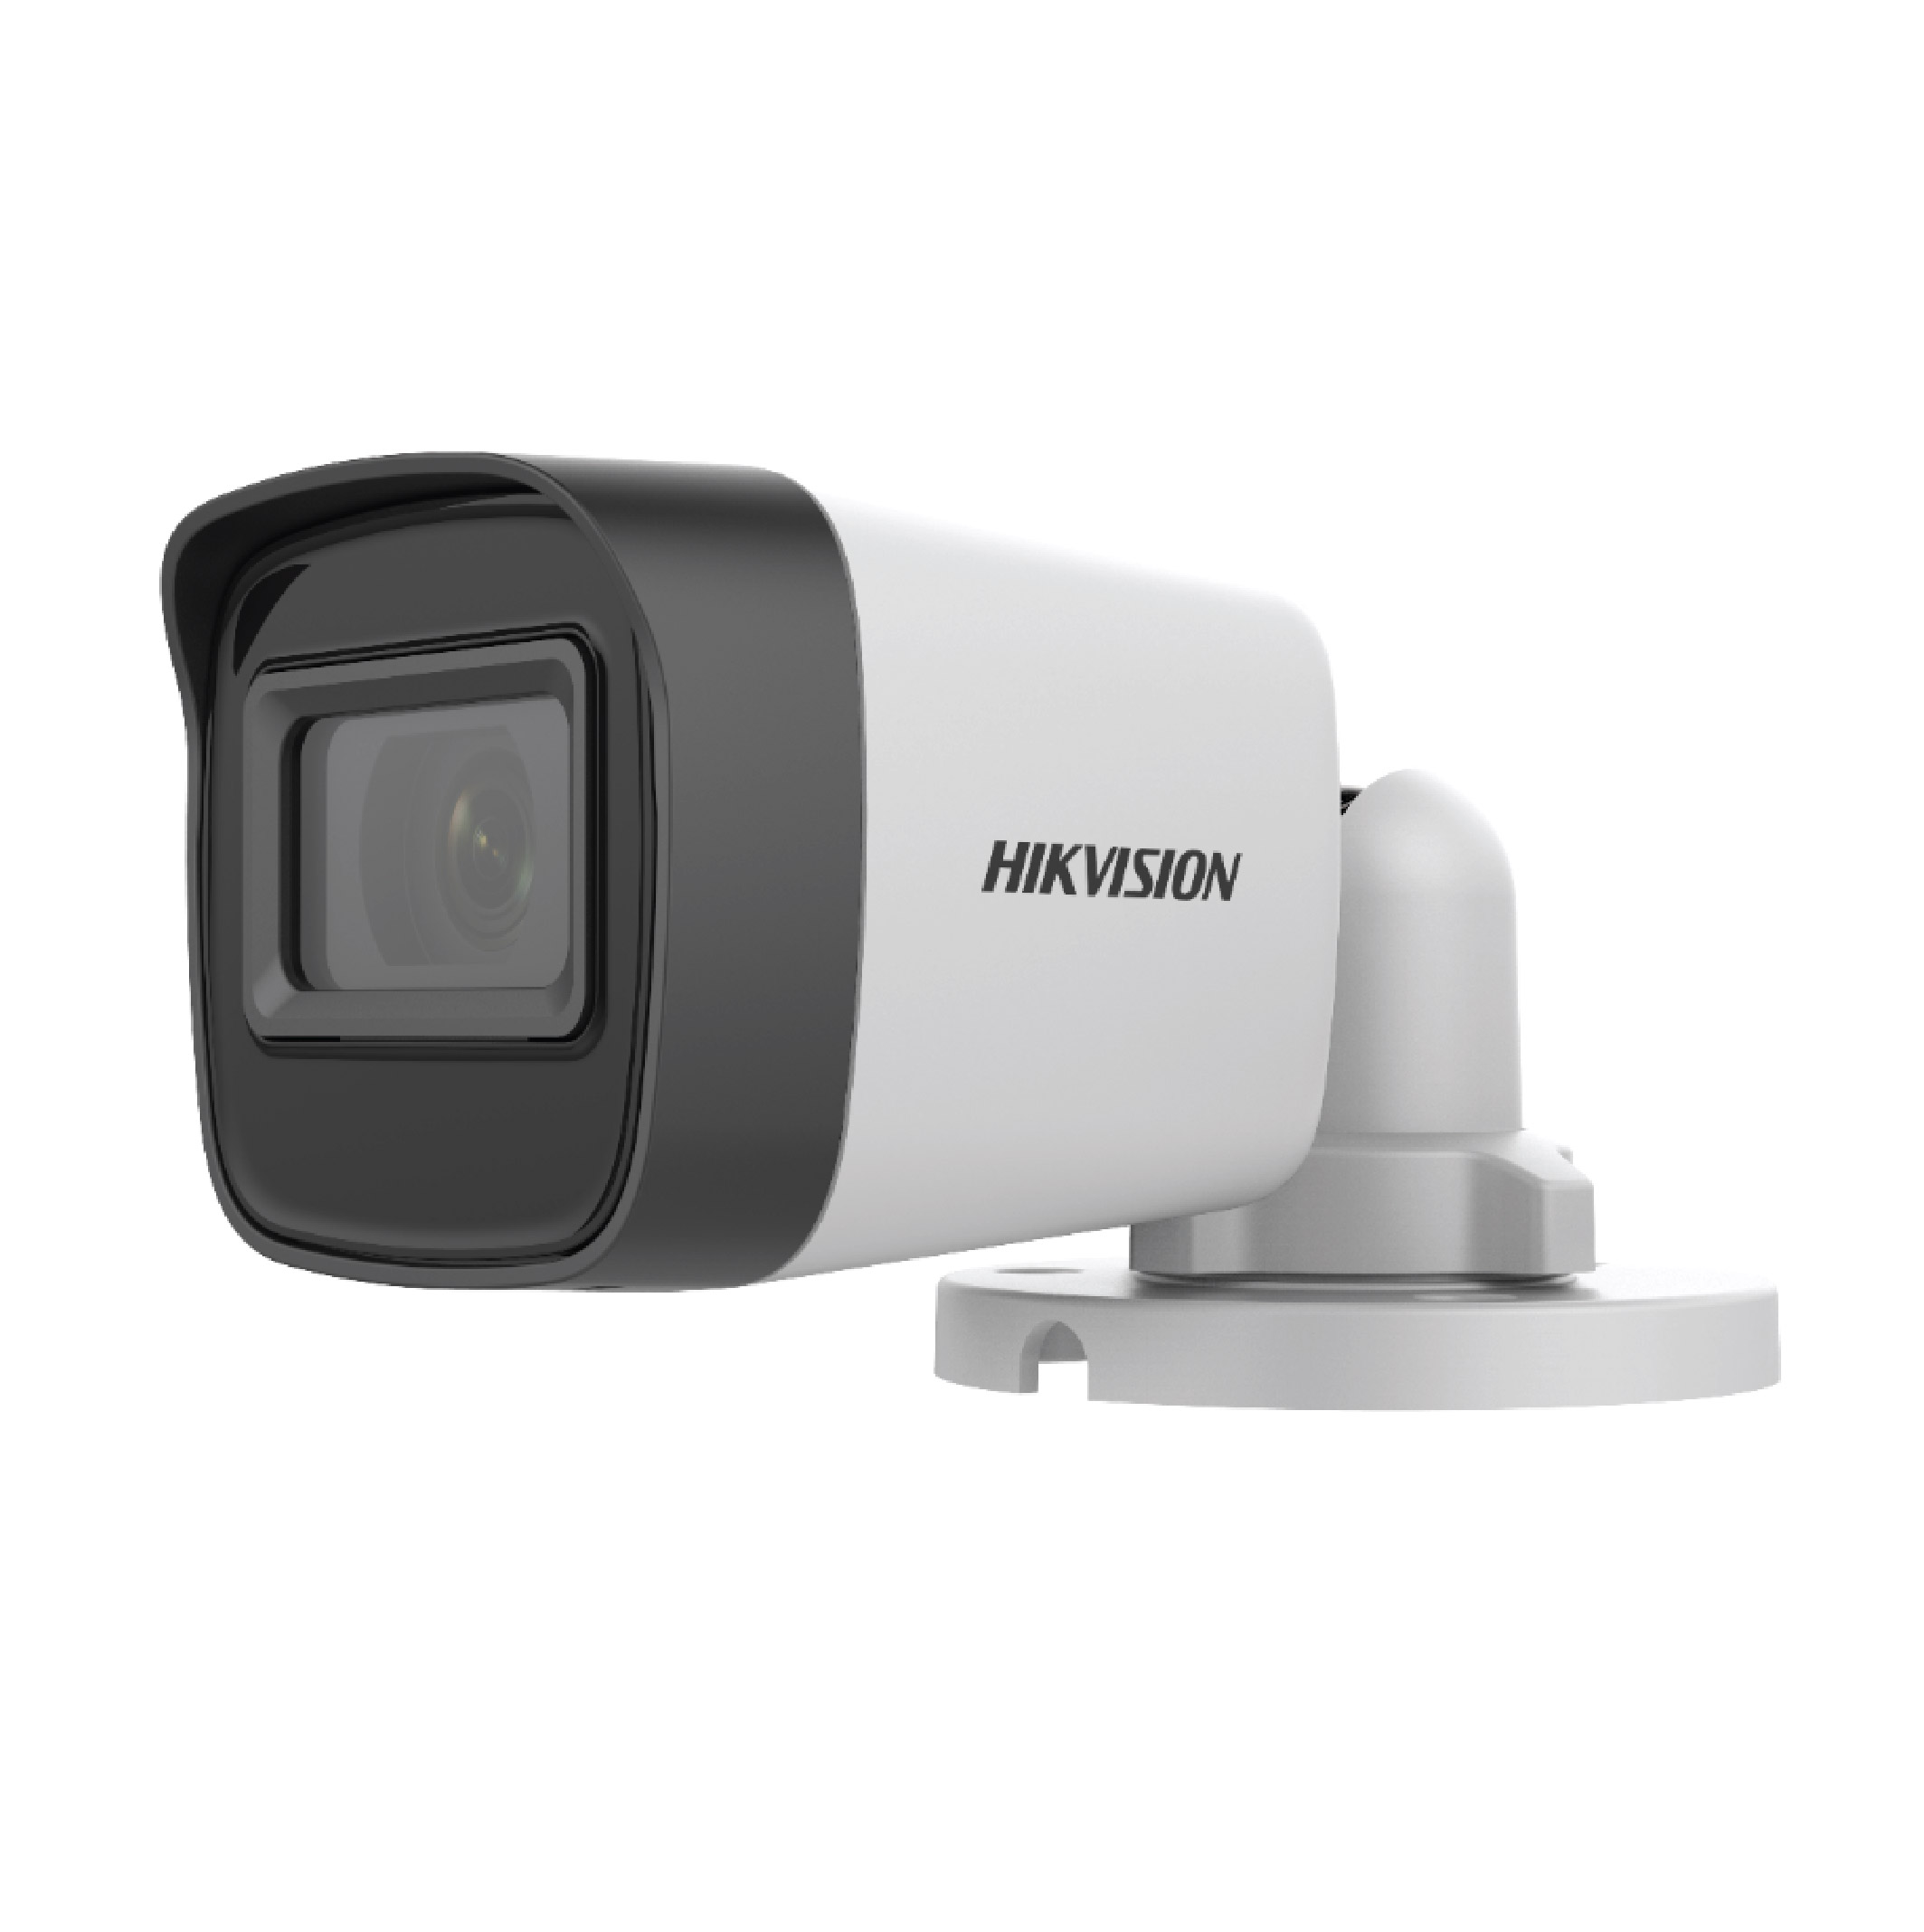 HIKVISION DS-2CE16H0T-ITPFS Turbo HD Camera